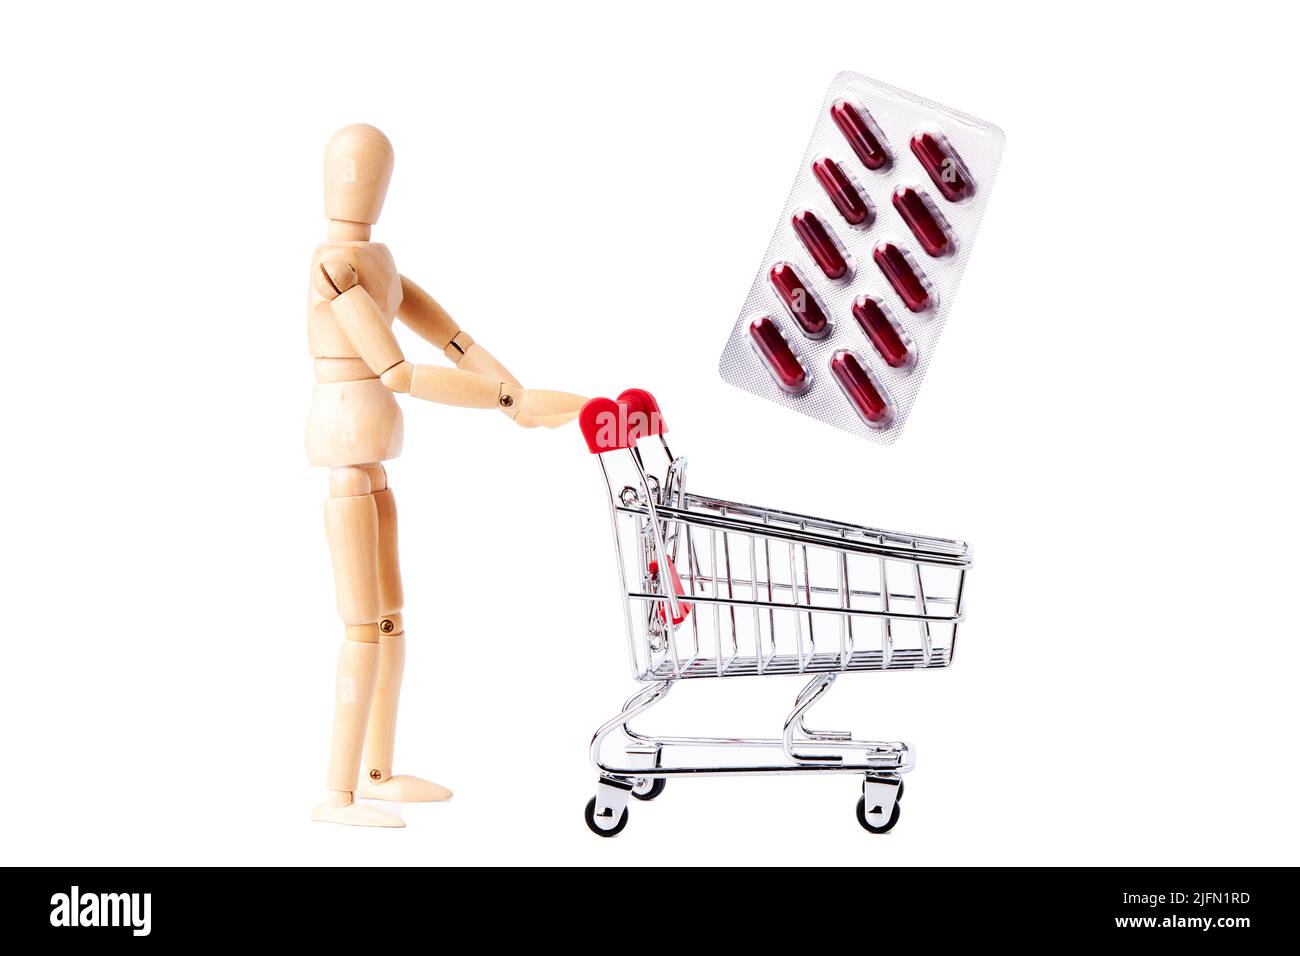 Dummy with a shopping cart dropping a blister of medicines on white background. Pharmacy and clinic concept Stock Photo